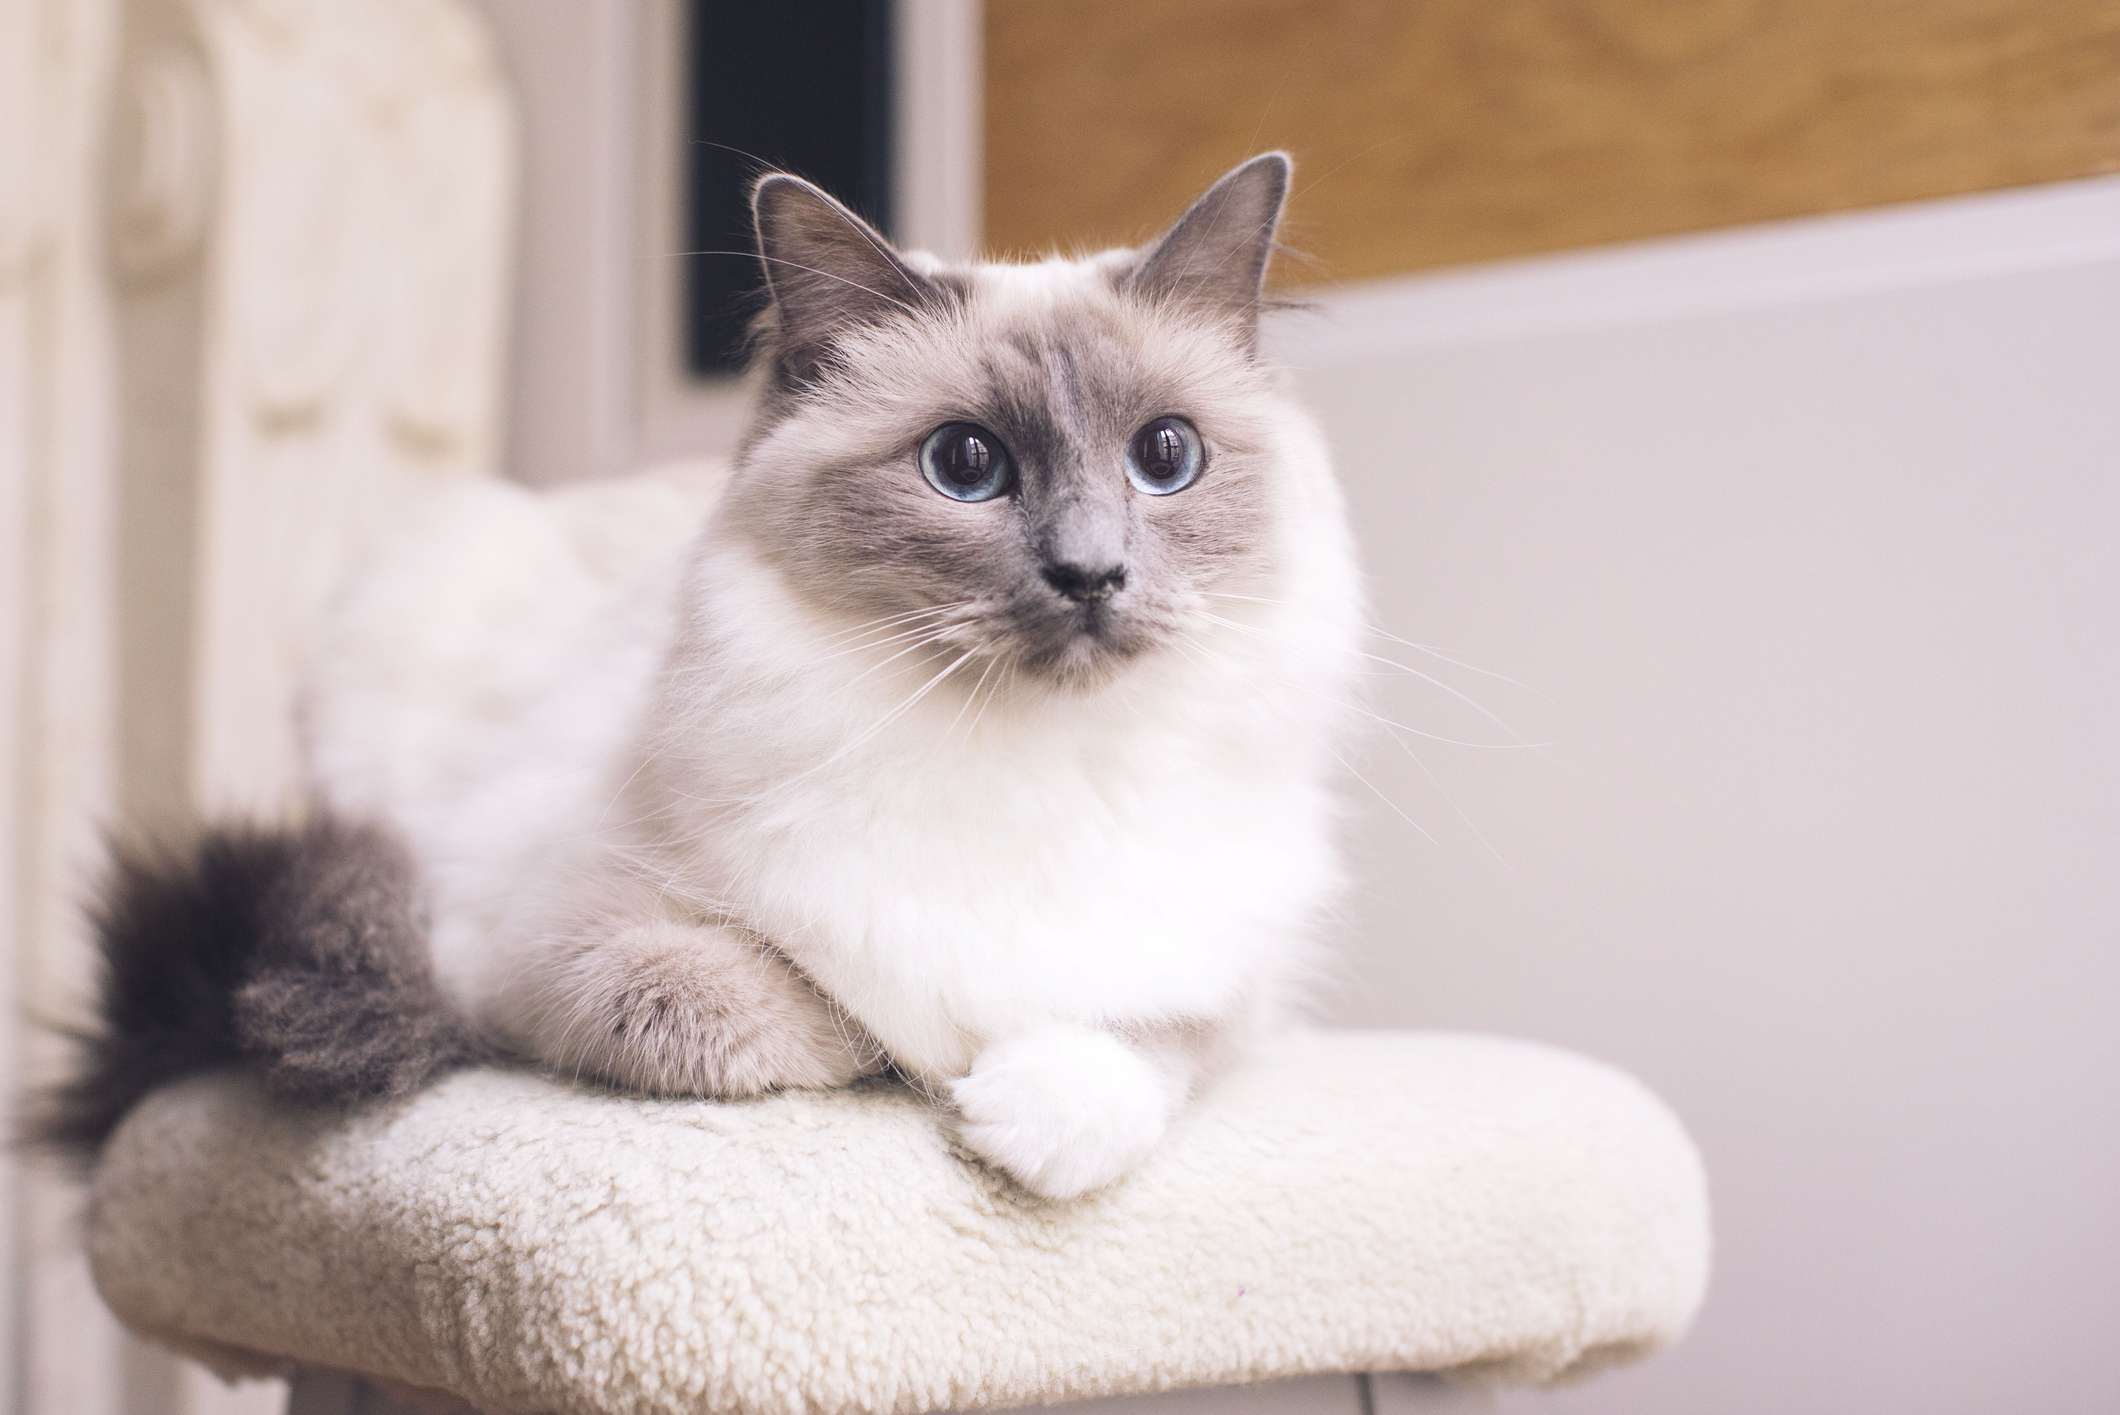 A white fluffy cat with grey markings on its tail, ears, and face sitting on a white cat tree.